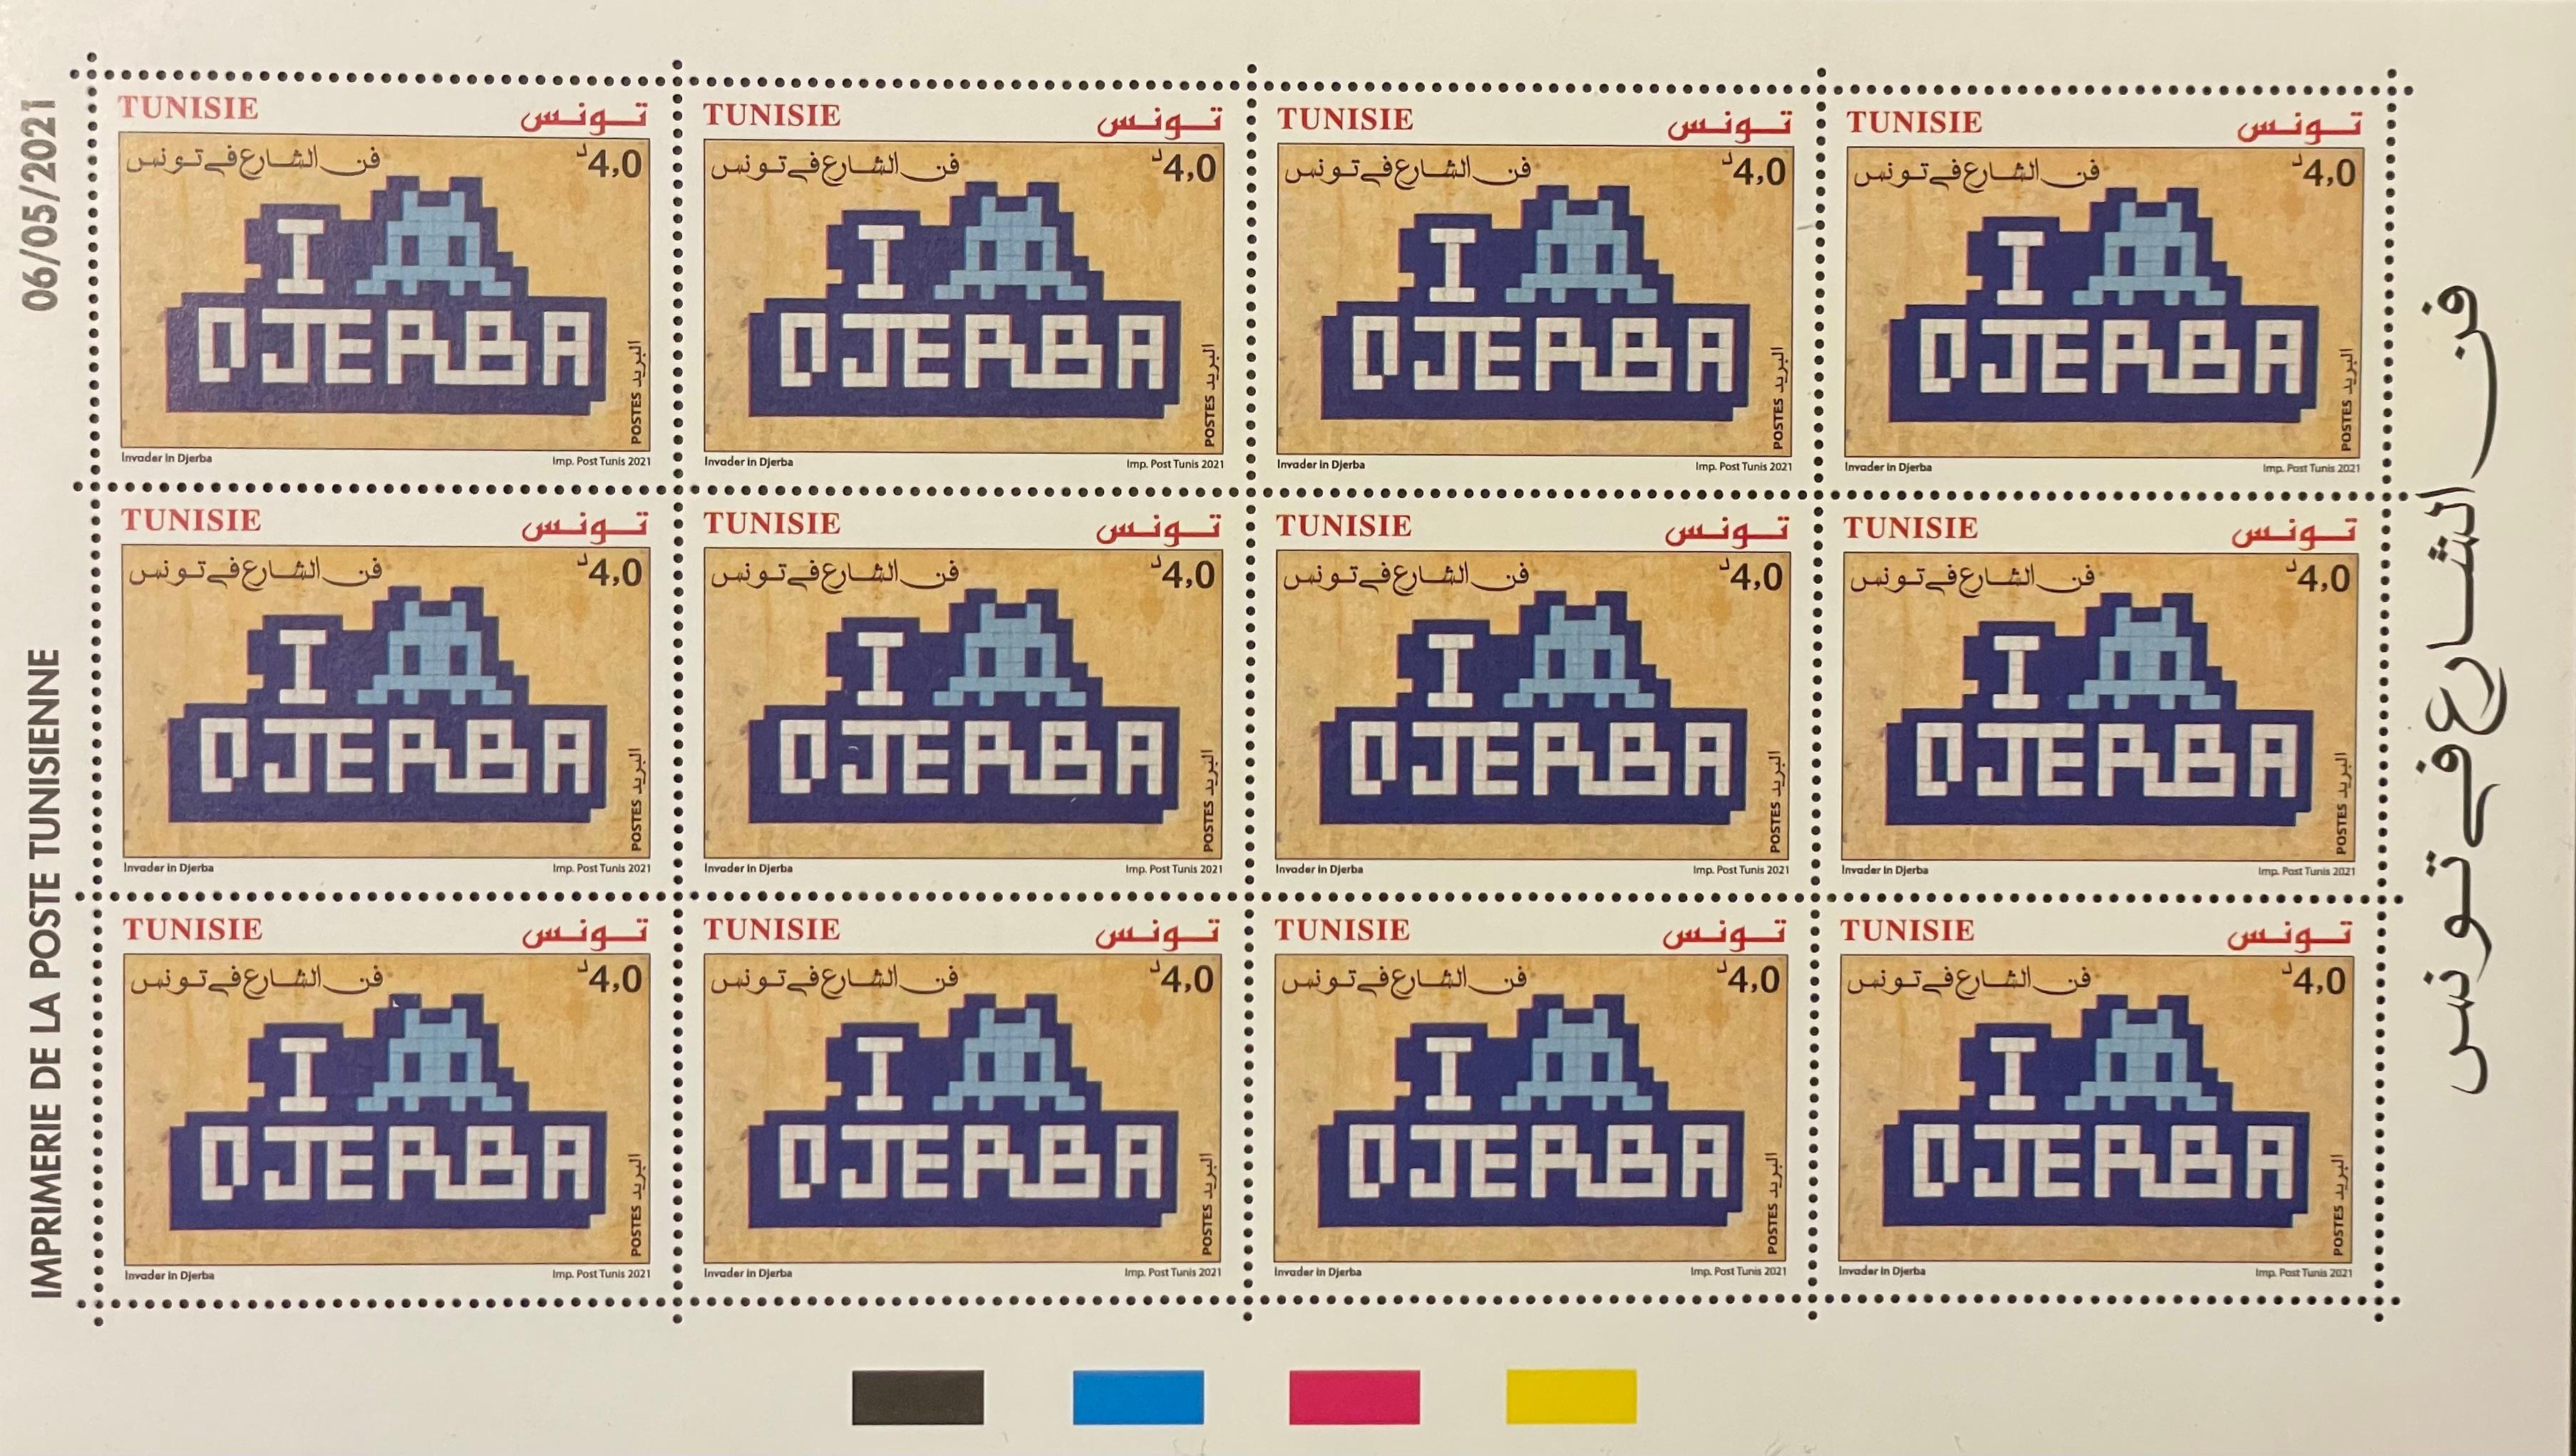 Space Invader Djerba Stamps Official Street Art Tunisia Full Sheet Print 